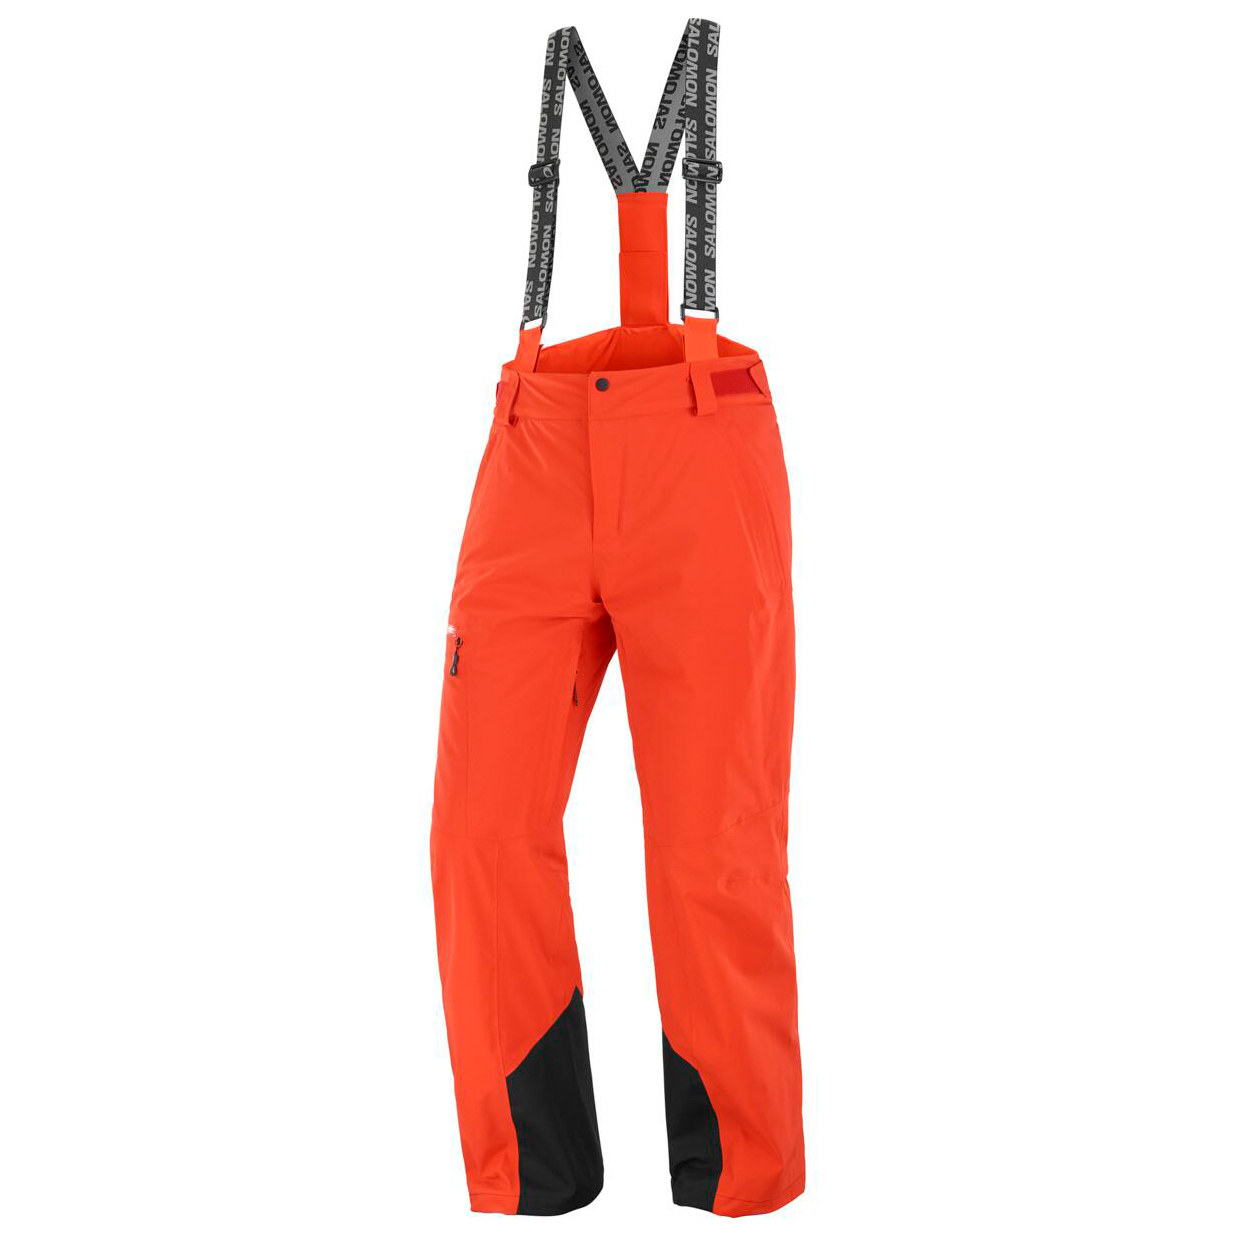 Ski Pants Guide, Picking Your Salopettes